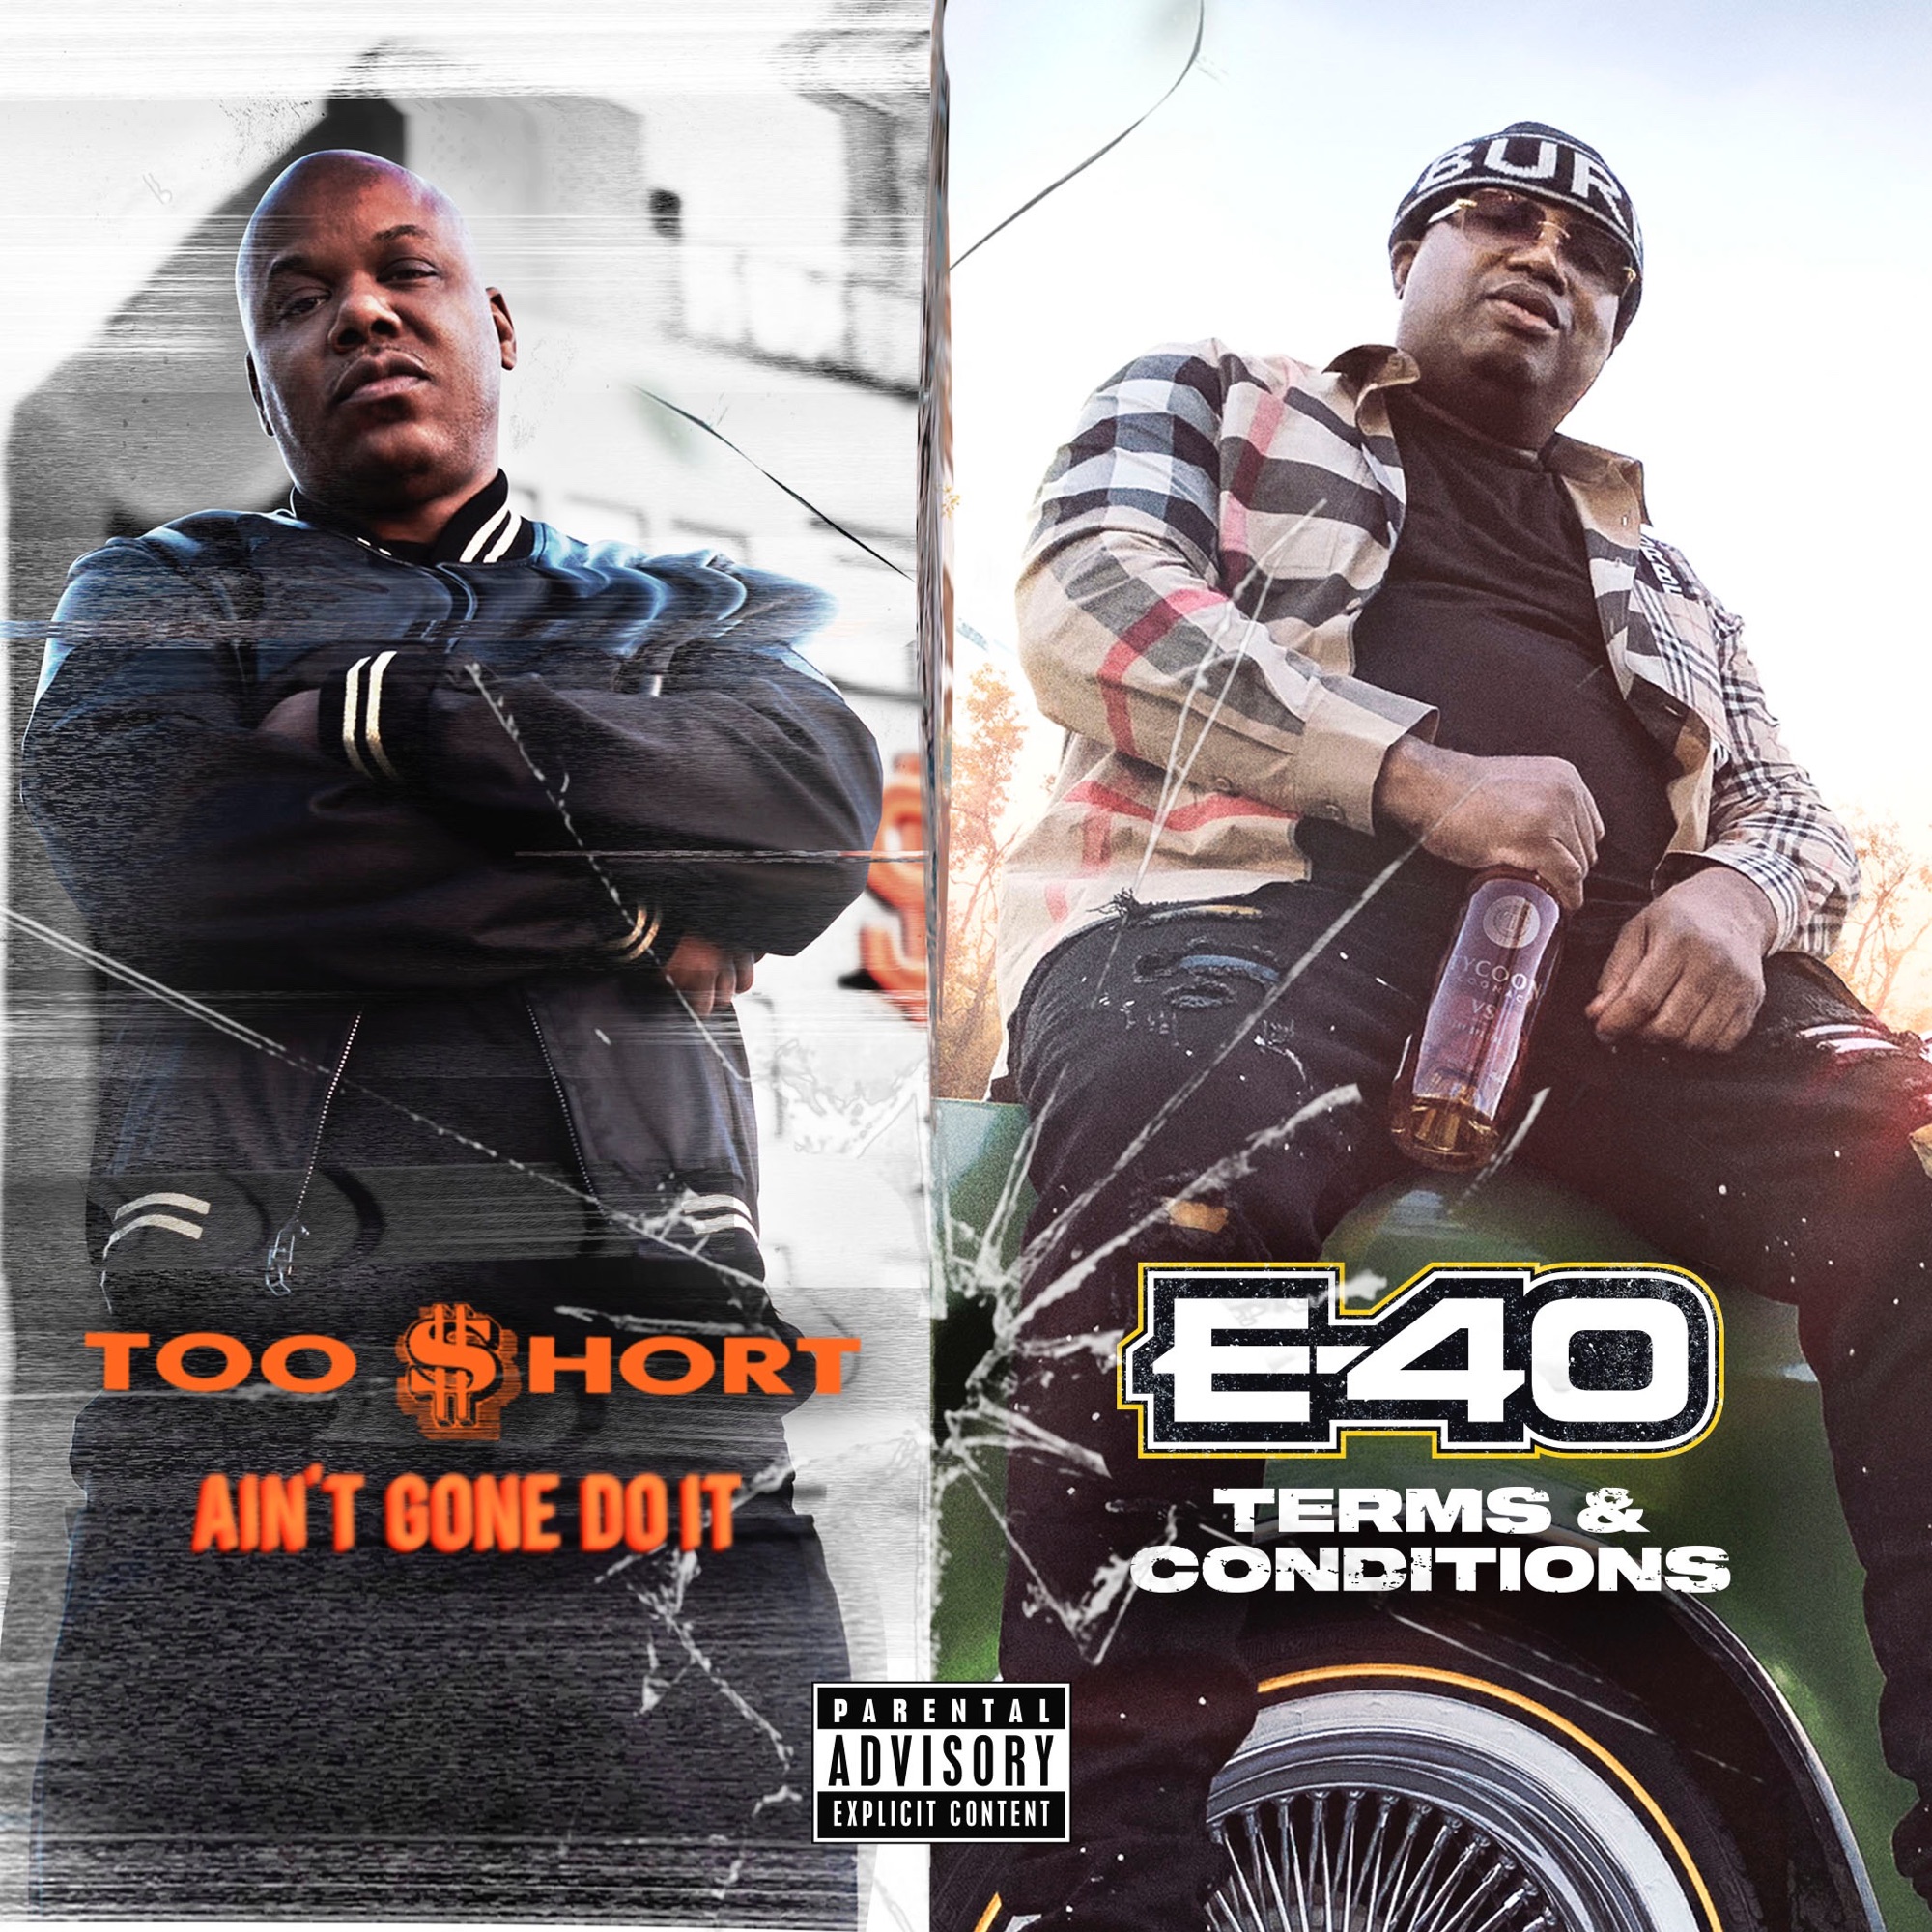 Too $hort & E-40 - Ain't Gone Do It / Terms and Conditions